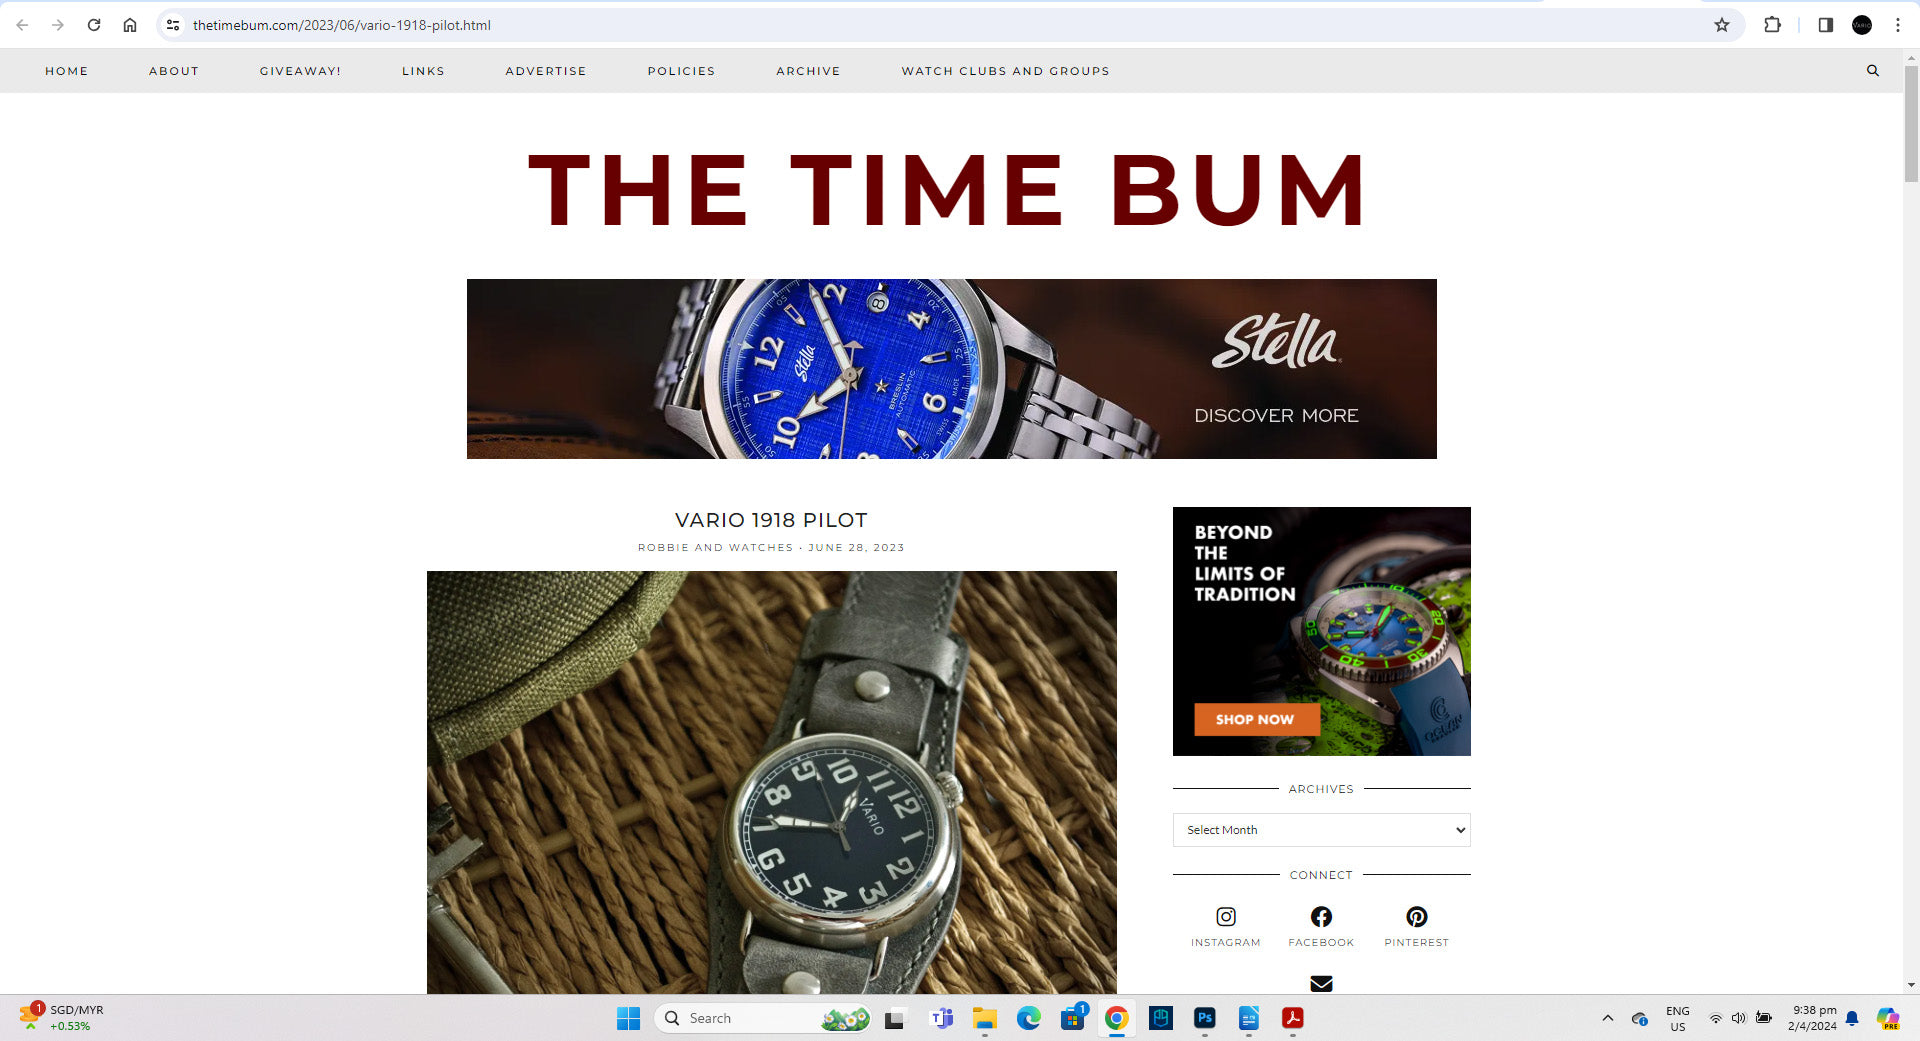 Vario 1918 Pilot featured on The Time Bum